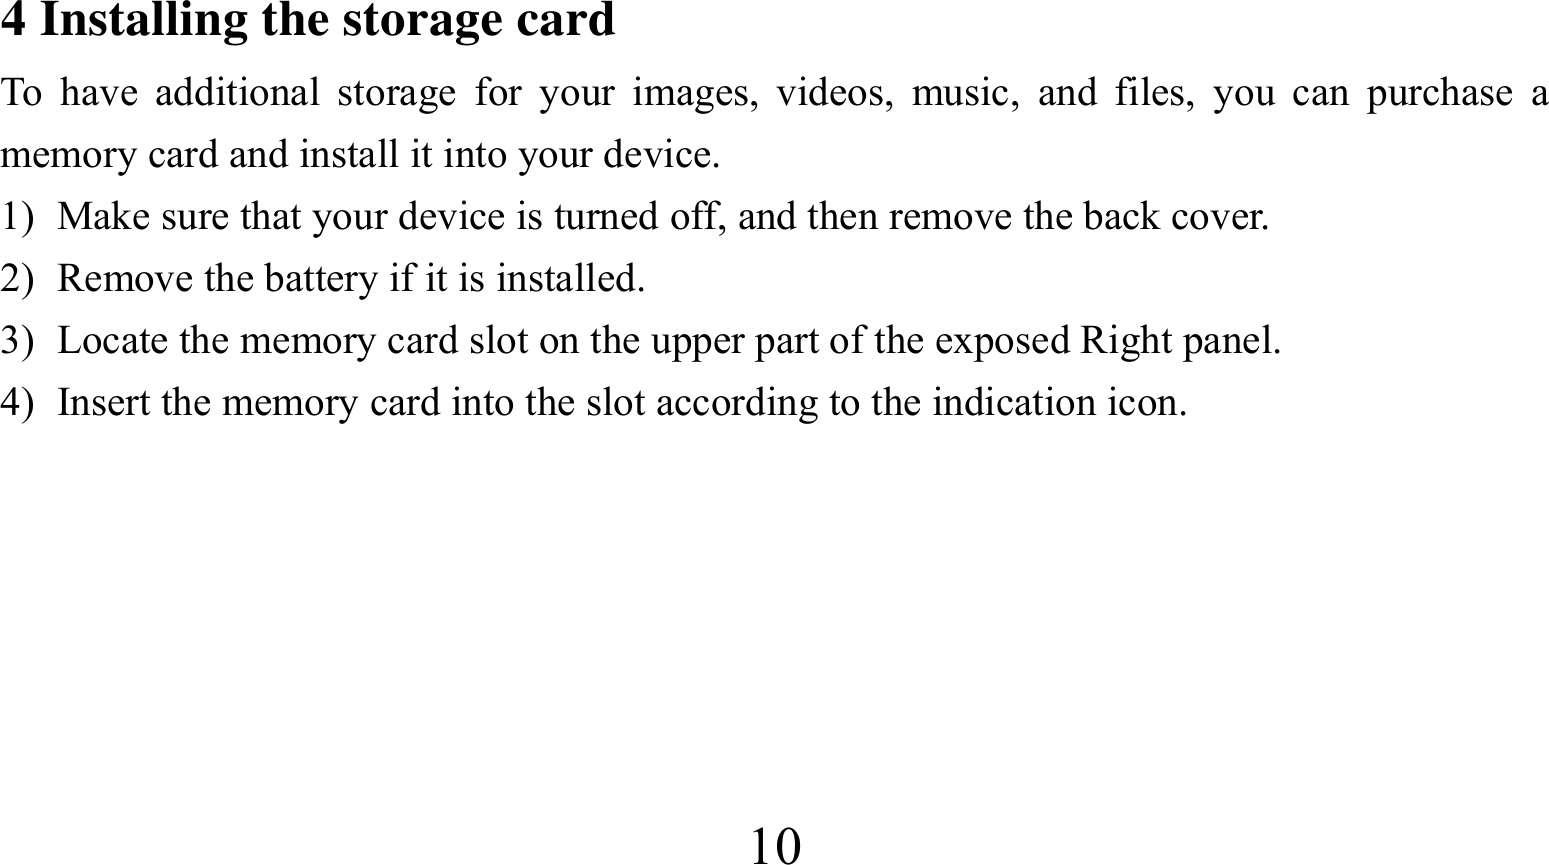  104 Installing the storage card To have additional storage for your images, videos, music, and files, you can purchase a memory card and install it into your device. 1) Make sure that your device is turned off, and then remove the back cover. 2) Remove the battery if it is installed.   3) Locate the memory card slot on the upper part of the exposed Right panel. 4) Insert the memory card into the slot according to the indication icon.       